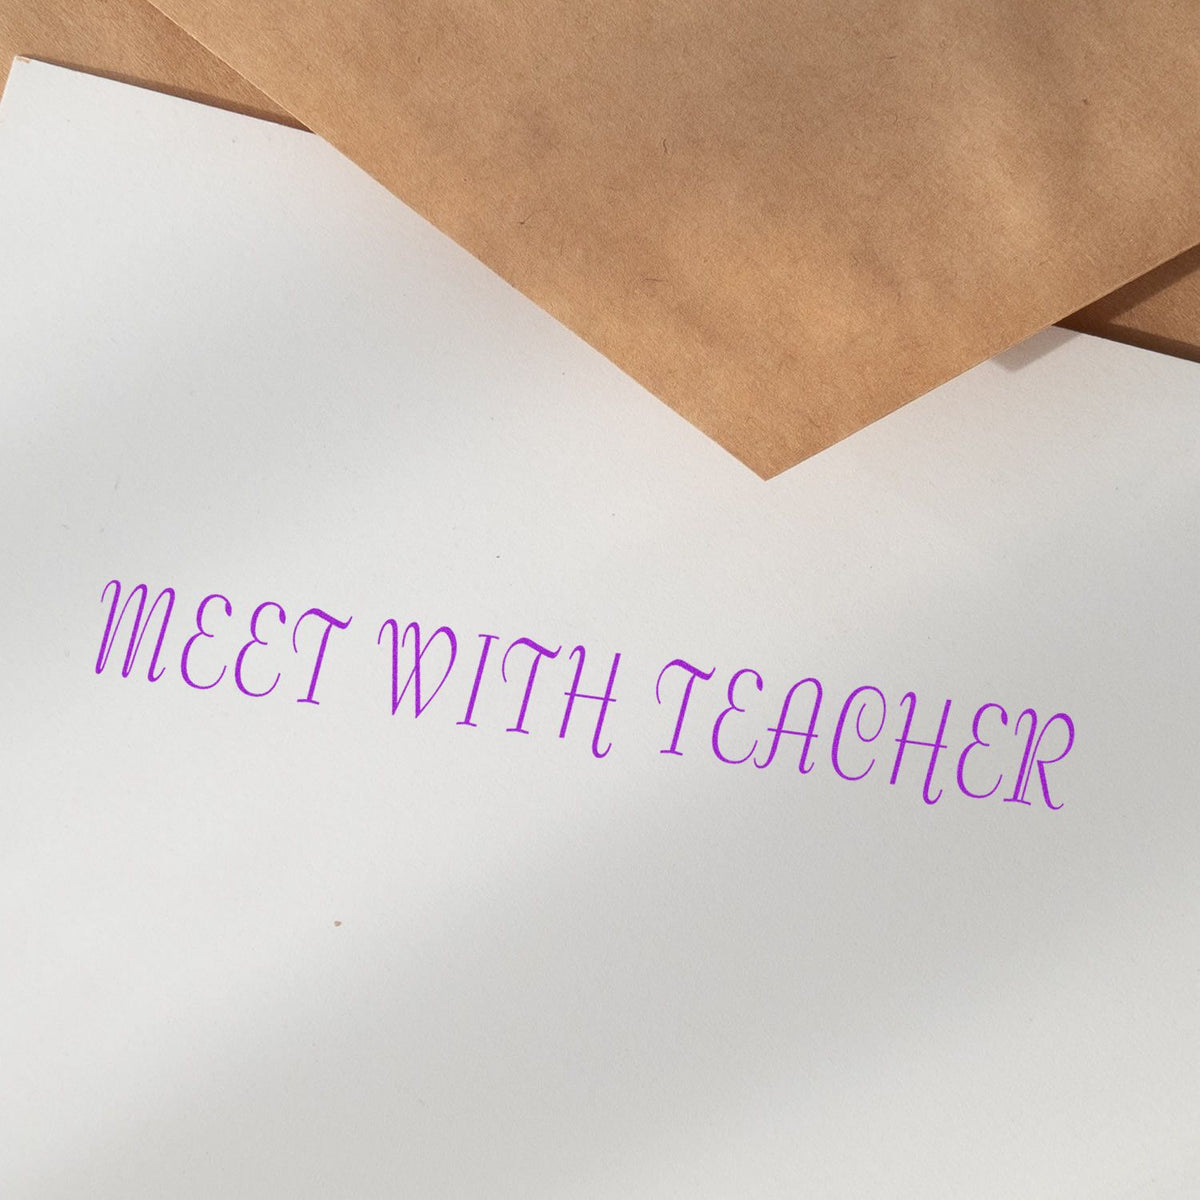 Meet With Teacher Rubber Stamp In Use